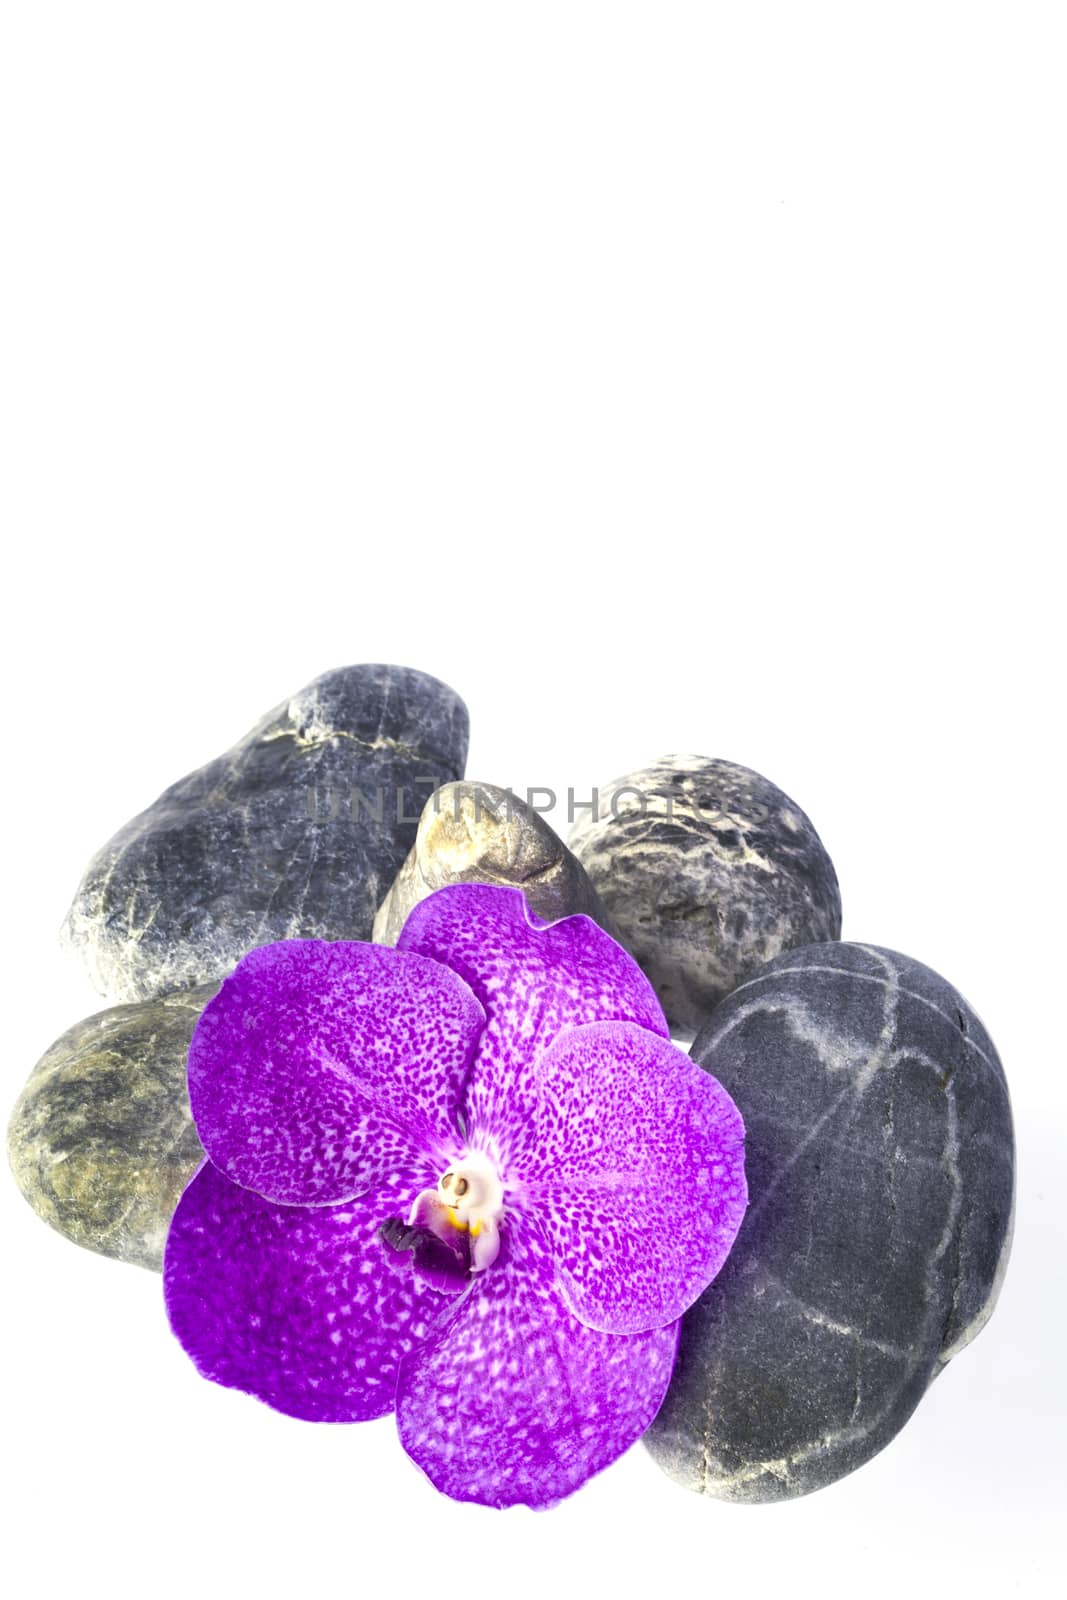 stones and orchid by jee1999